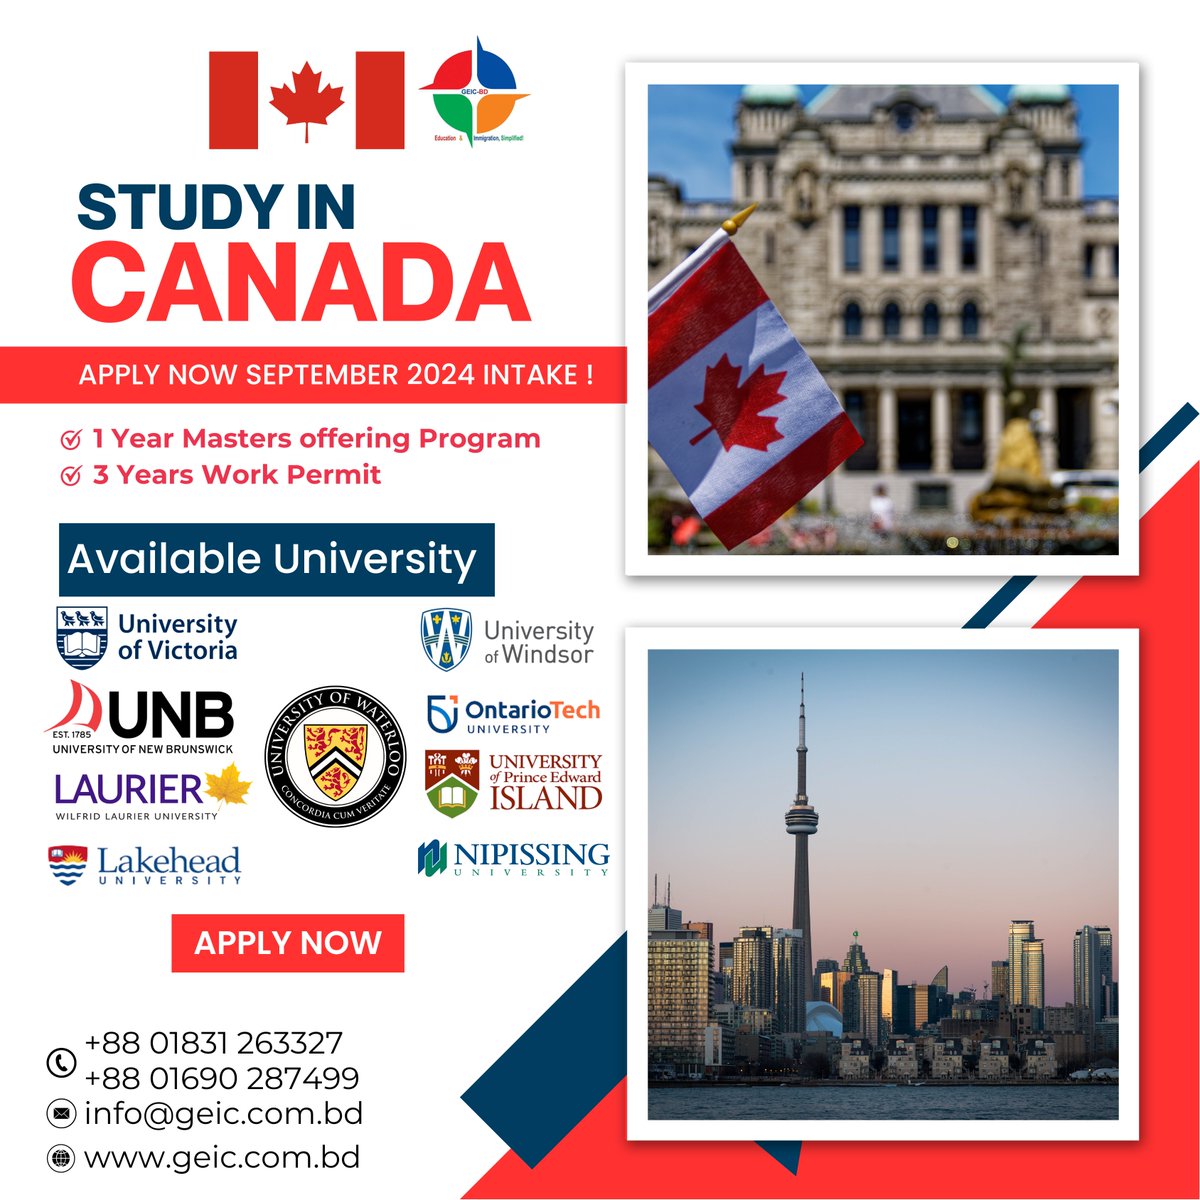 ' Study in Canada ' With top ranked university in Canada for master’s program. #study #studyabroad #studyabroadlife #studymotivation #studyincanada #studyinCANADA2024 #studyincanada📷 #studyincanadanow